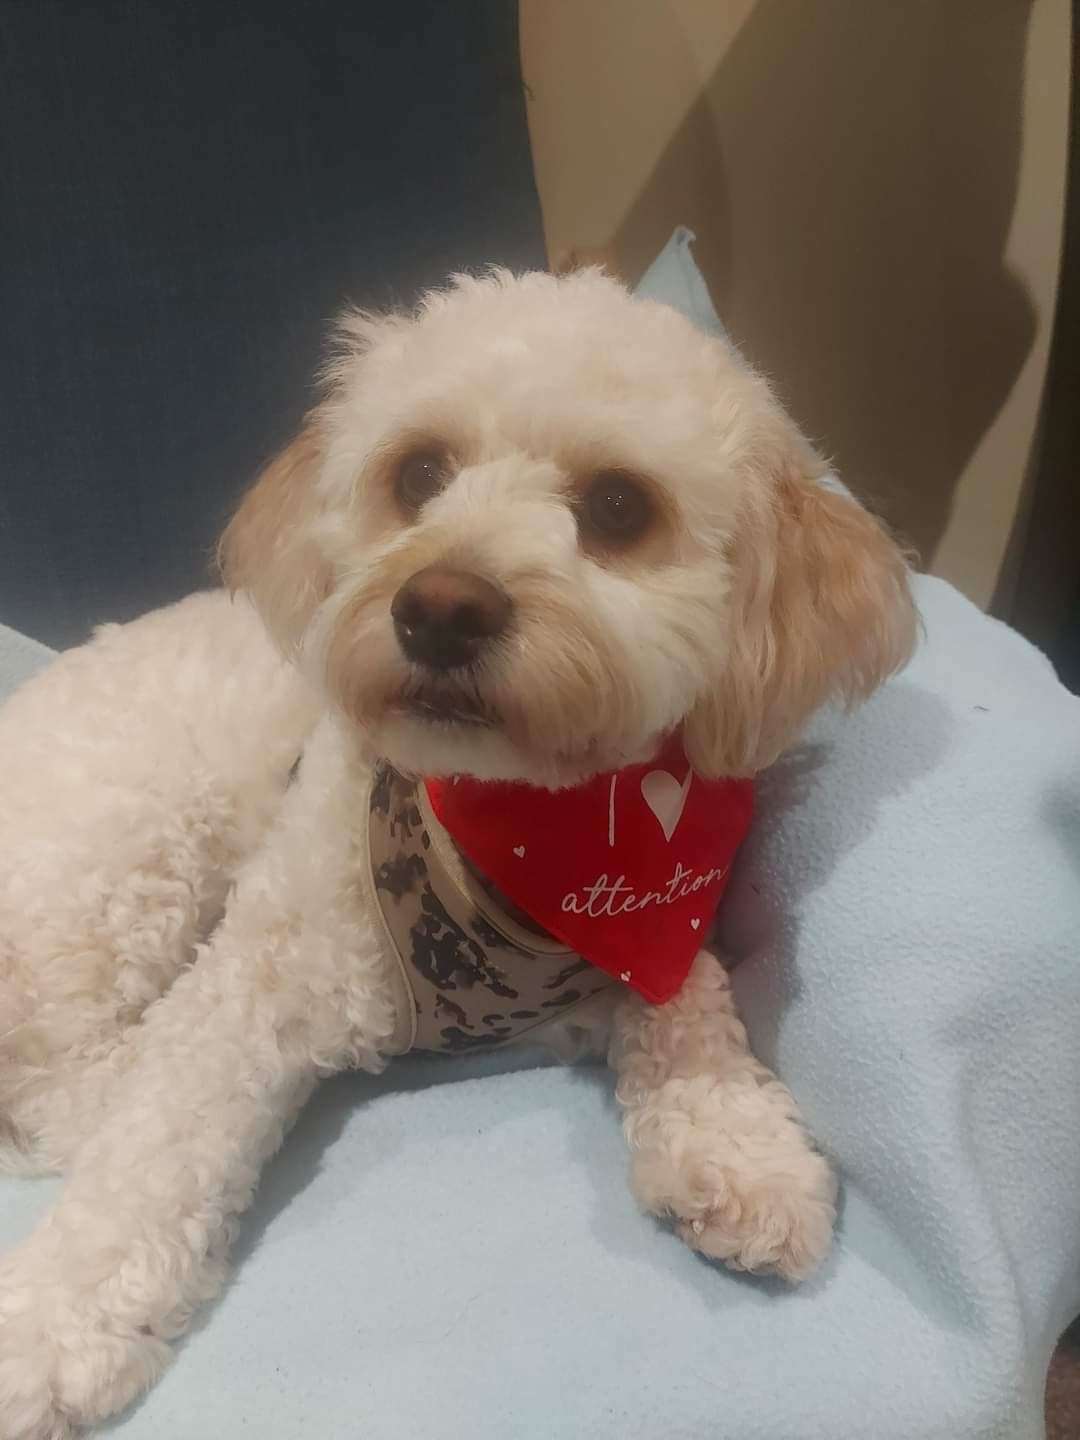 Sam Gough sent in a picture of Daisy wearing her Valentine's bandanna.